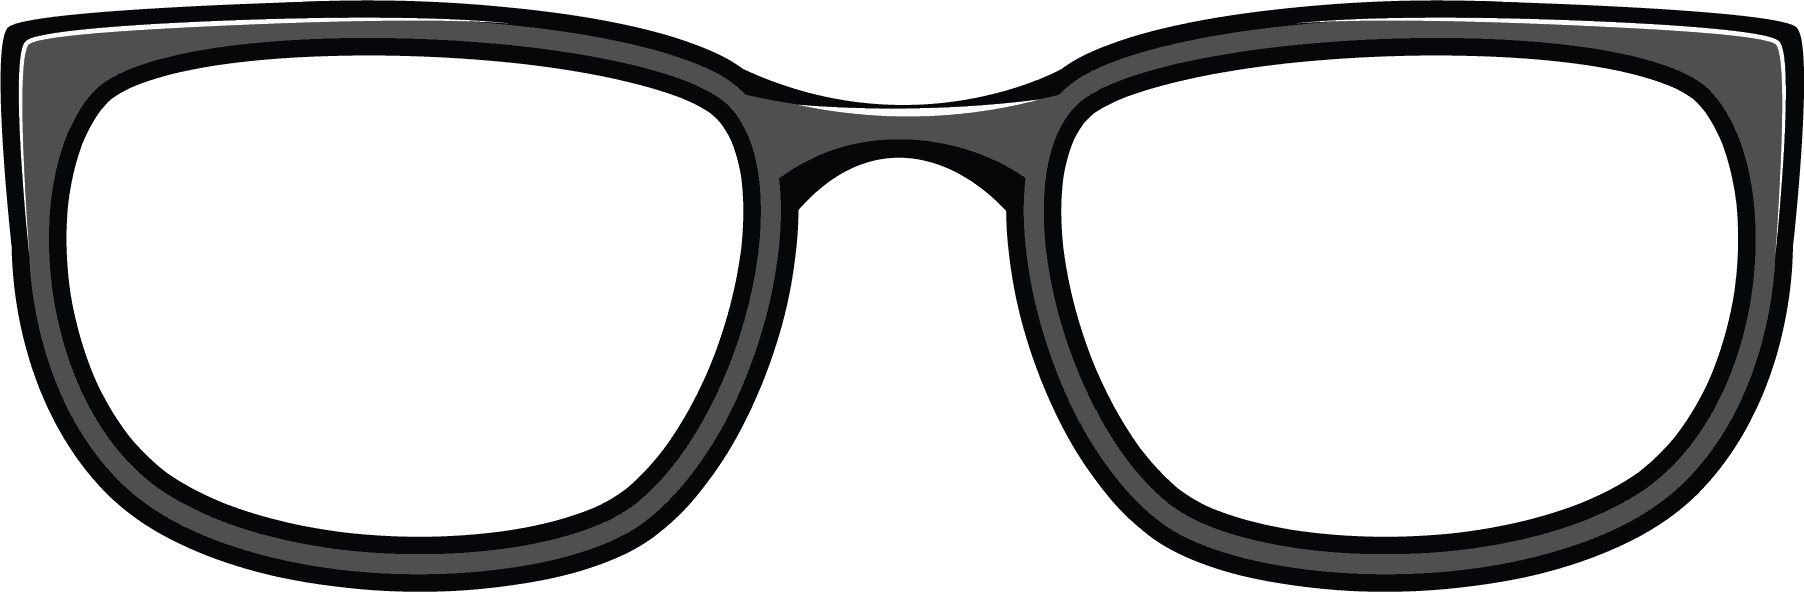 Eyes With Glasses Cartoon | Clipart Panda - Free Clipart Images